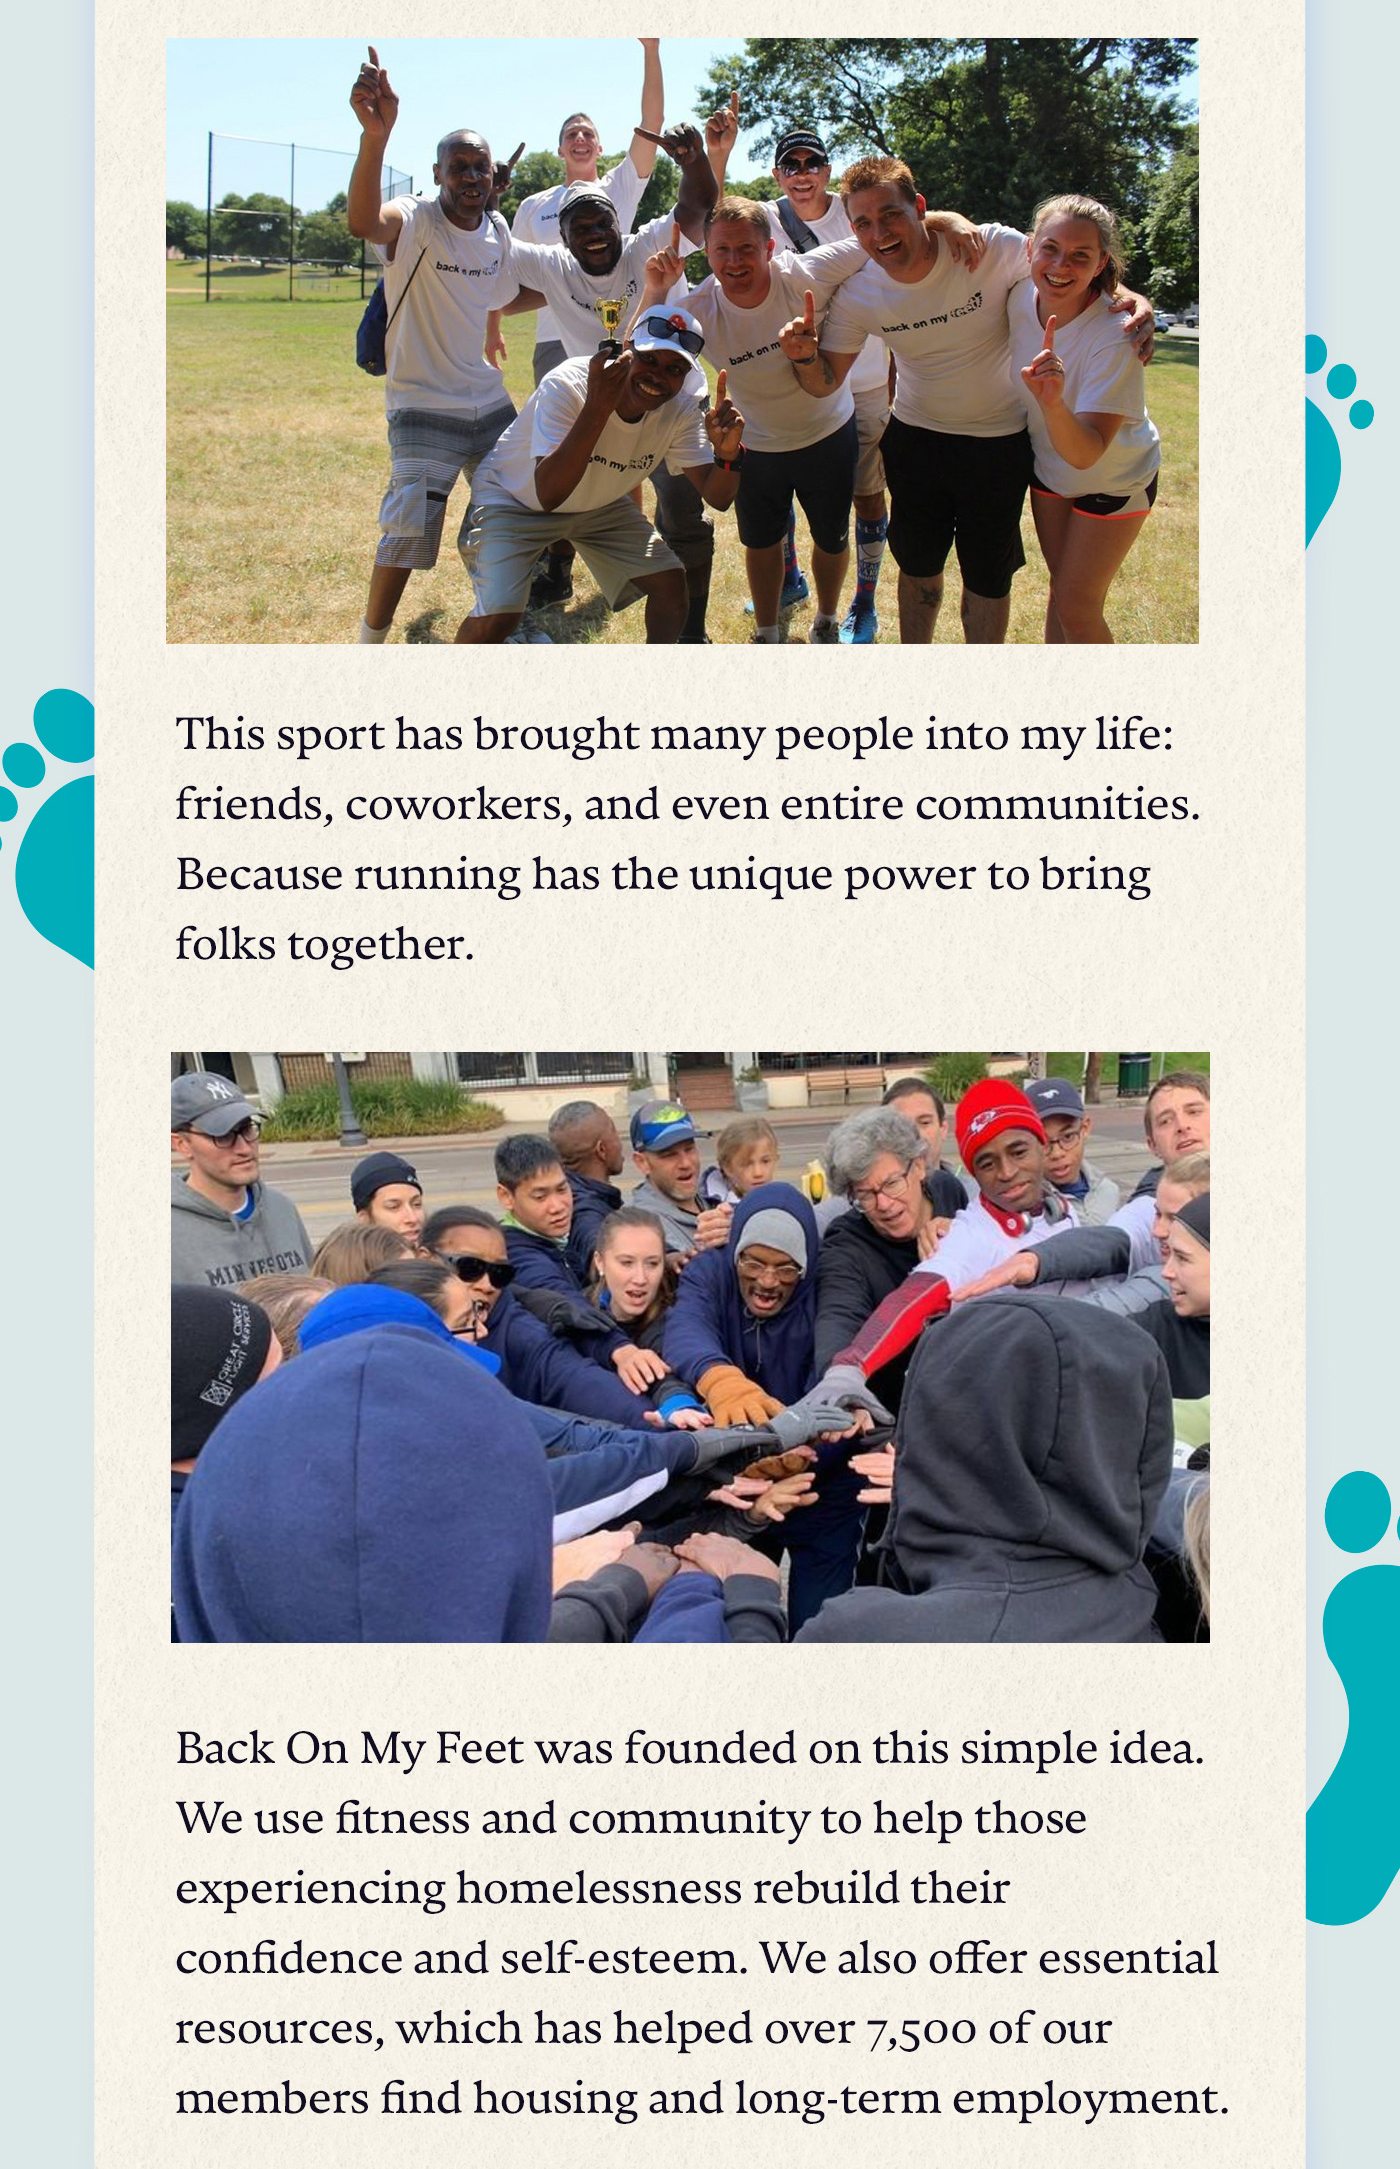 This sport has brought many people into my life: friends, coworkers, and even entire communities. Because running has the unique power to bring folks together. Back On My Feet was founded on this simple idea. We use fitness and community to help those experiencing homelessness rebuild their confidence and self-esteem. We also offer essential resources, which has helped over 7,500 of our members find housing and long-term employment.